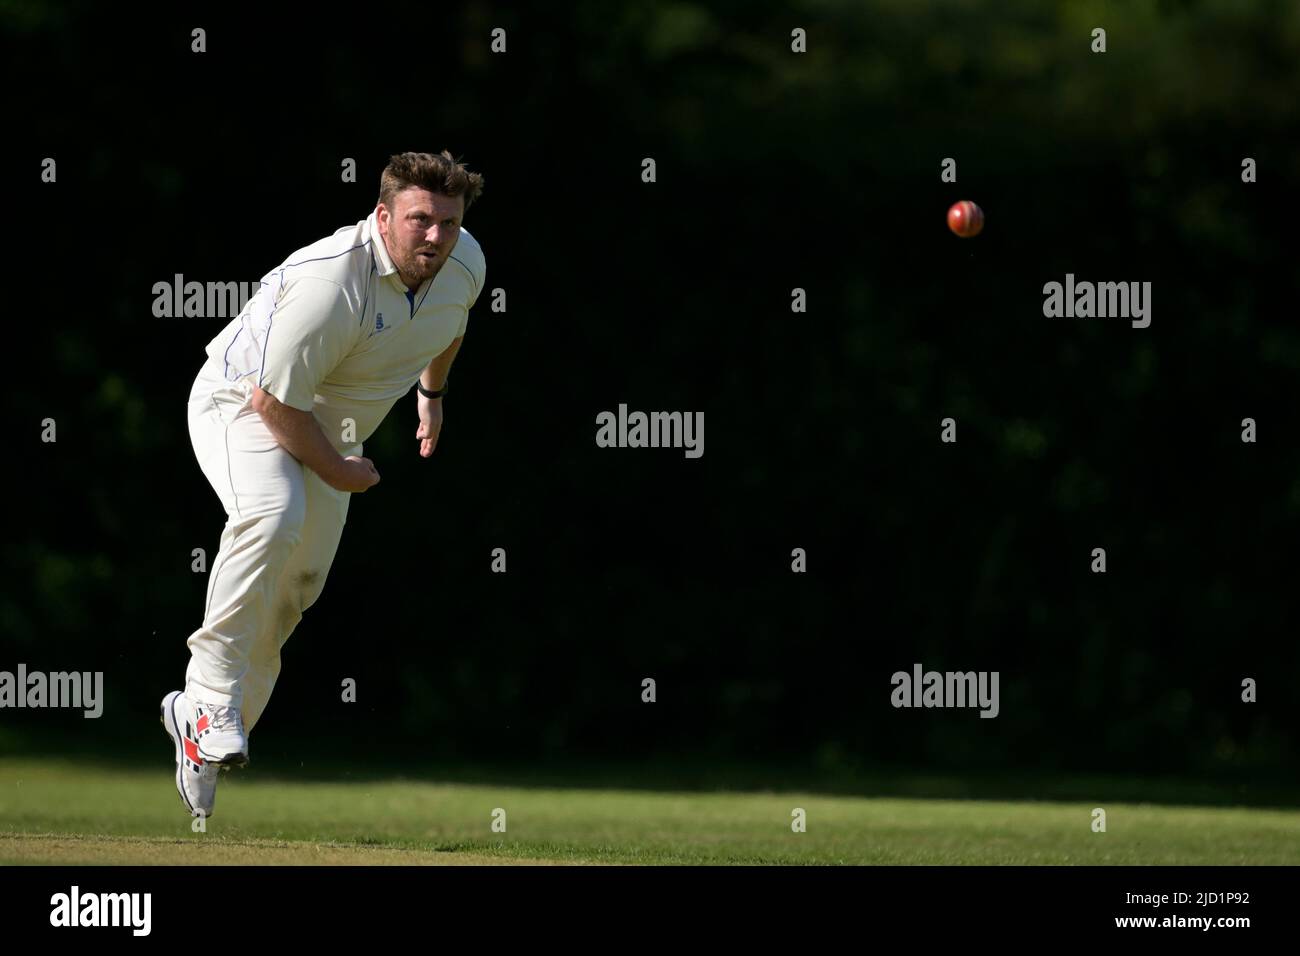 Cricket bowler in action Stock Photo